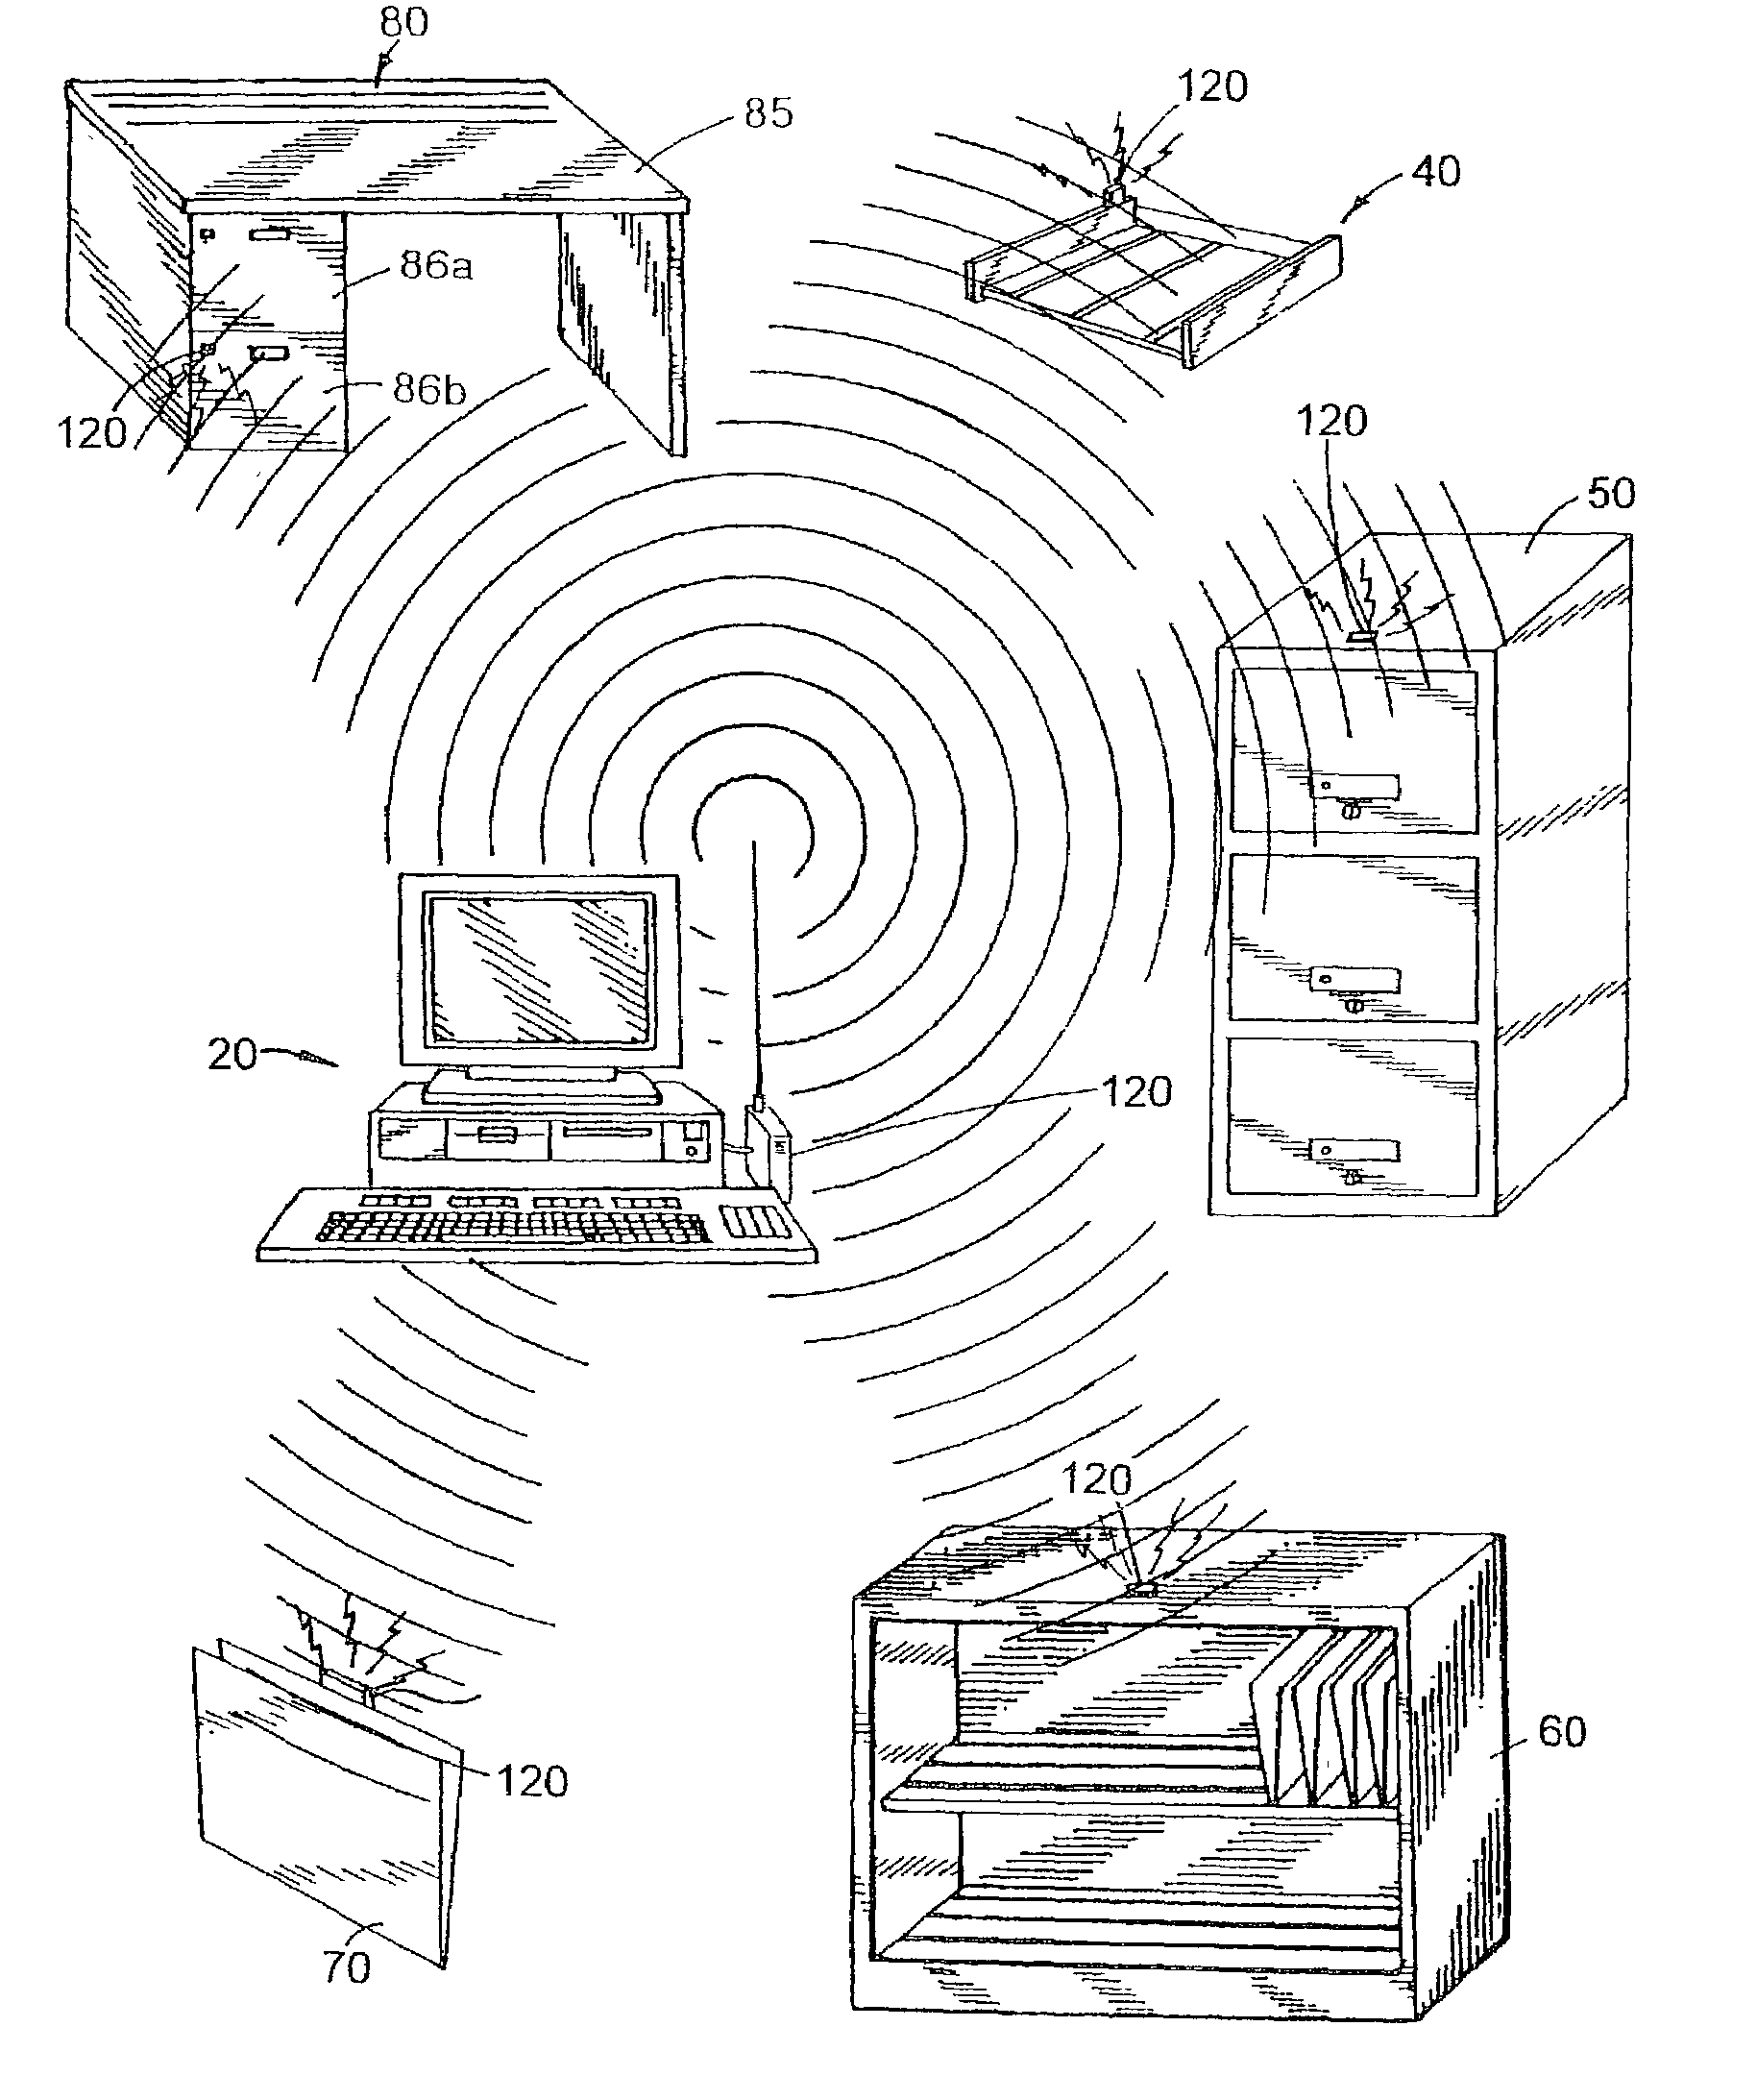 Electronic system, components and method for tracking files